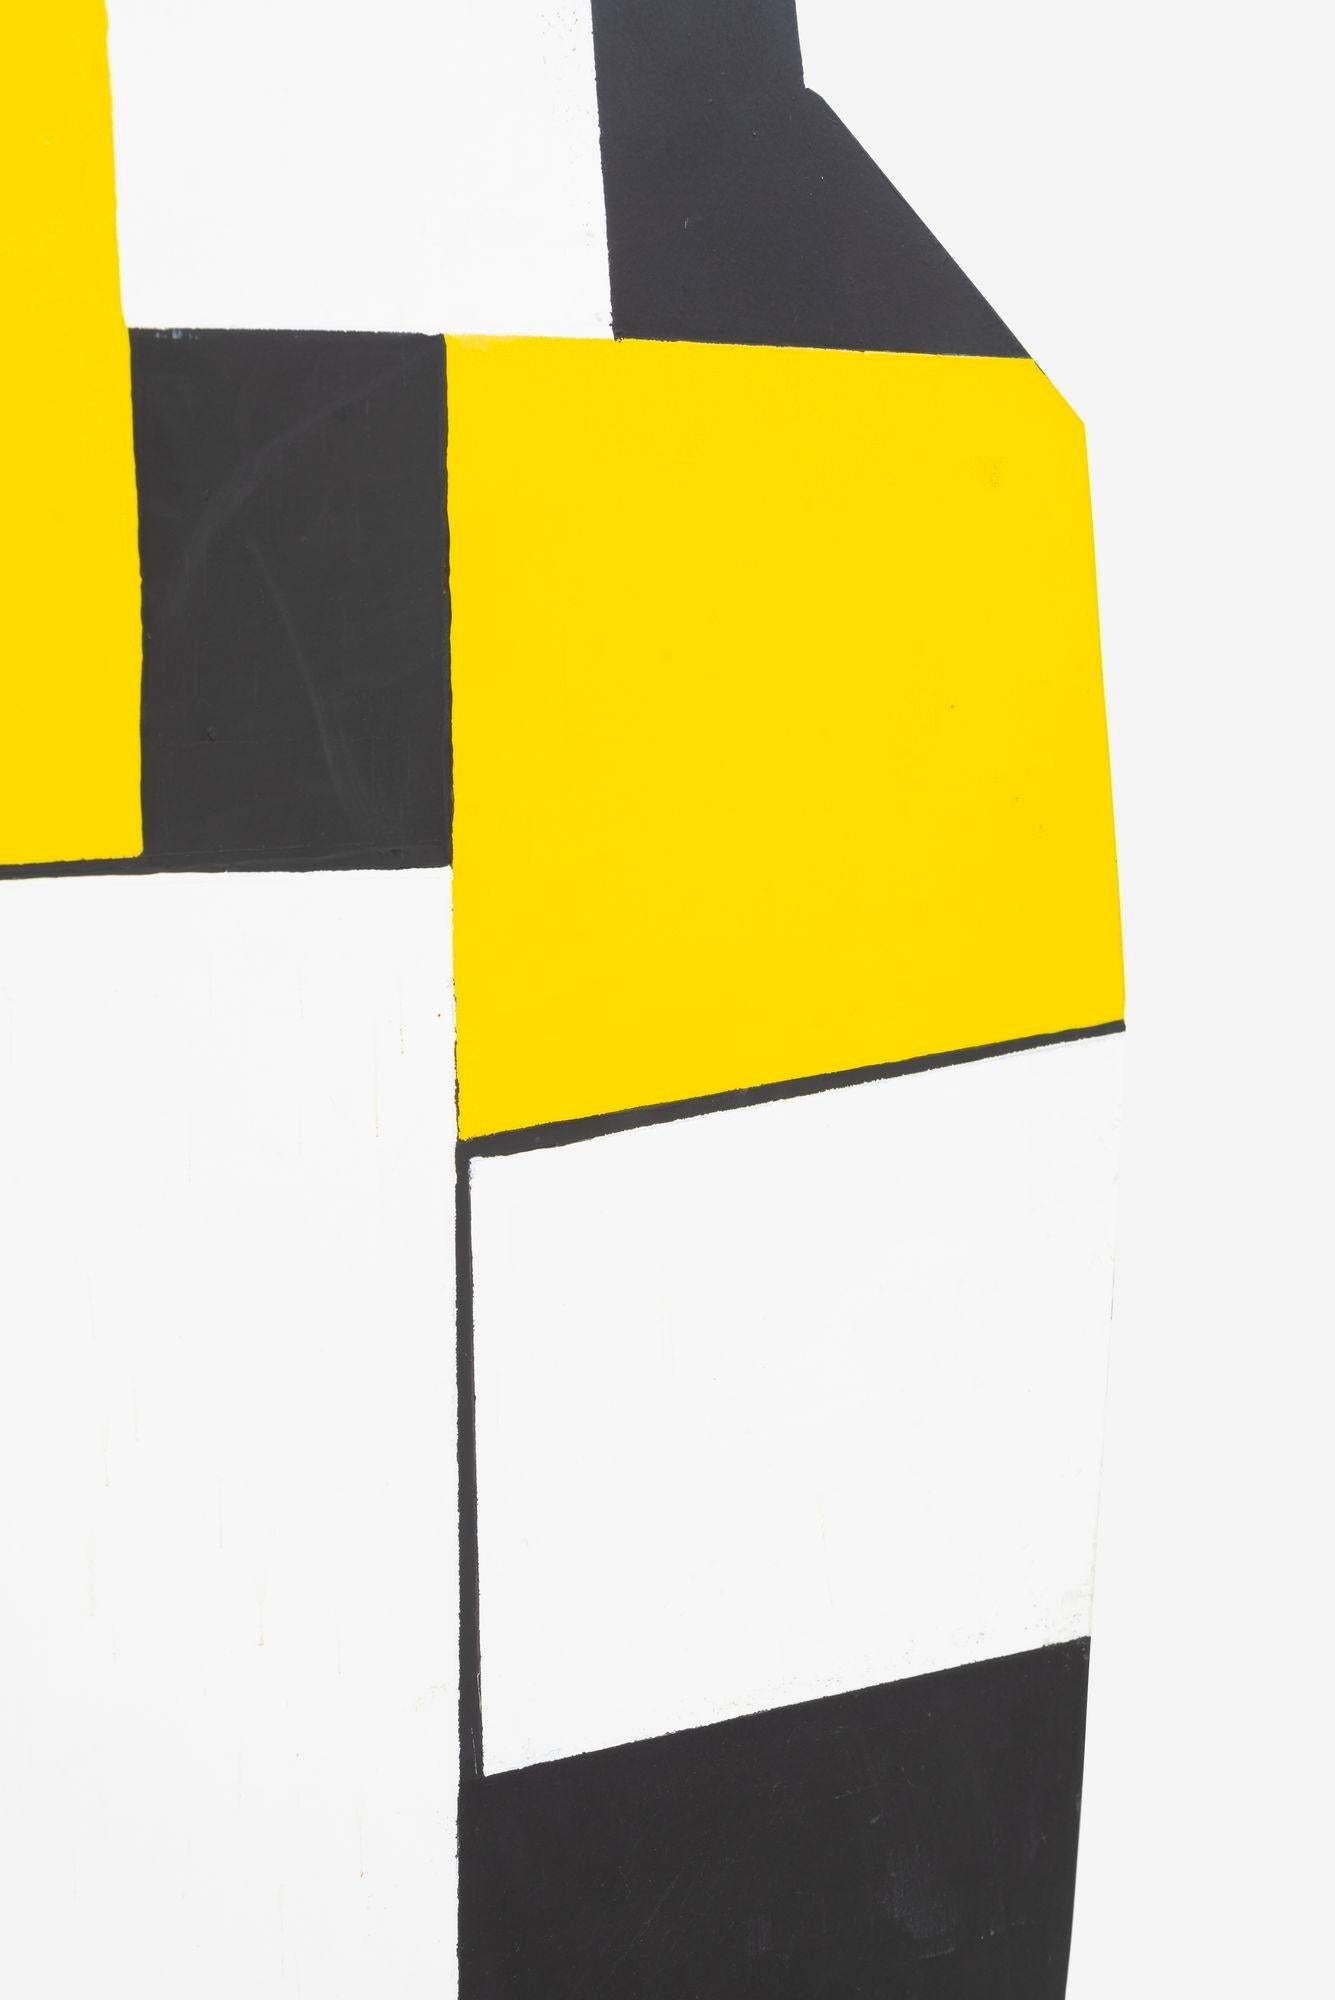 Tony Rosenthal Standing Black and White Plus Yellow Floor Sculpture For Sale 1